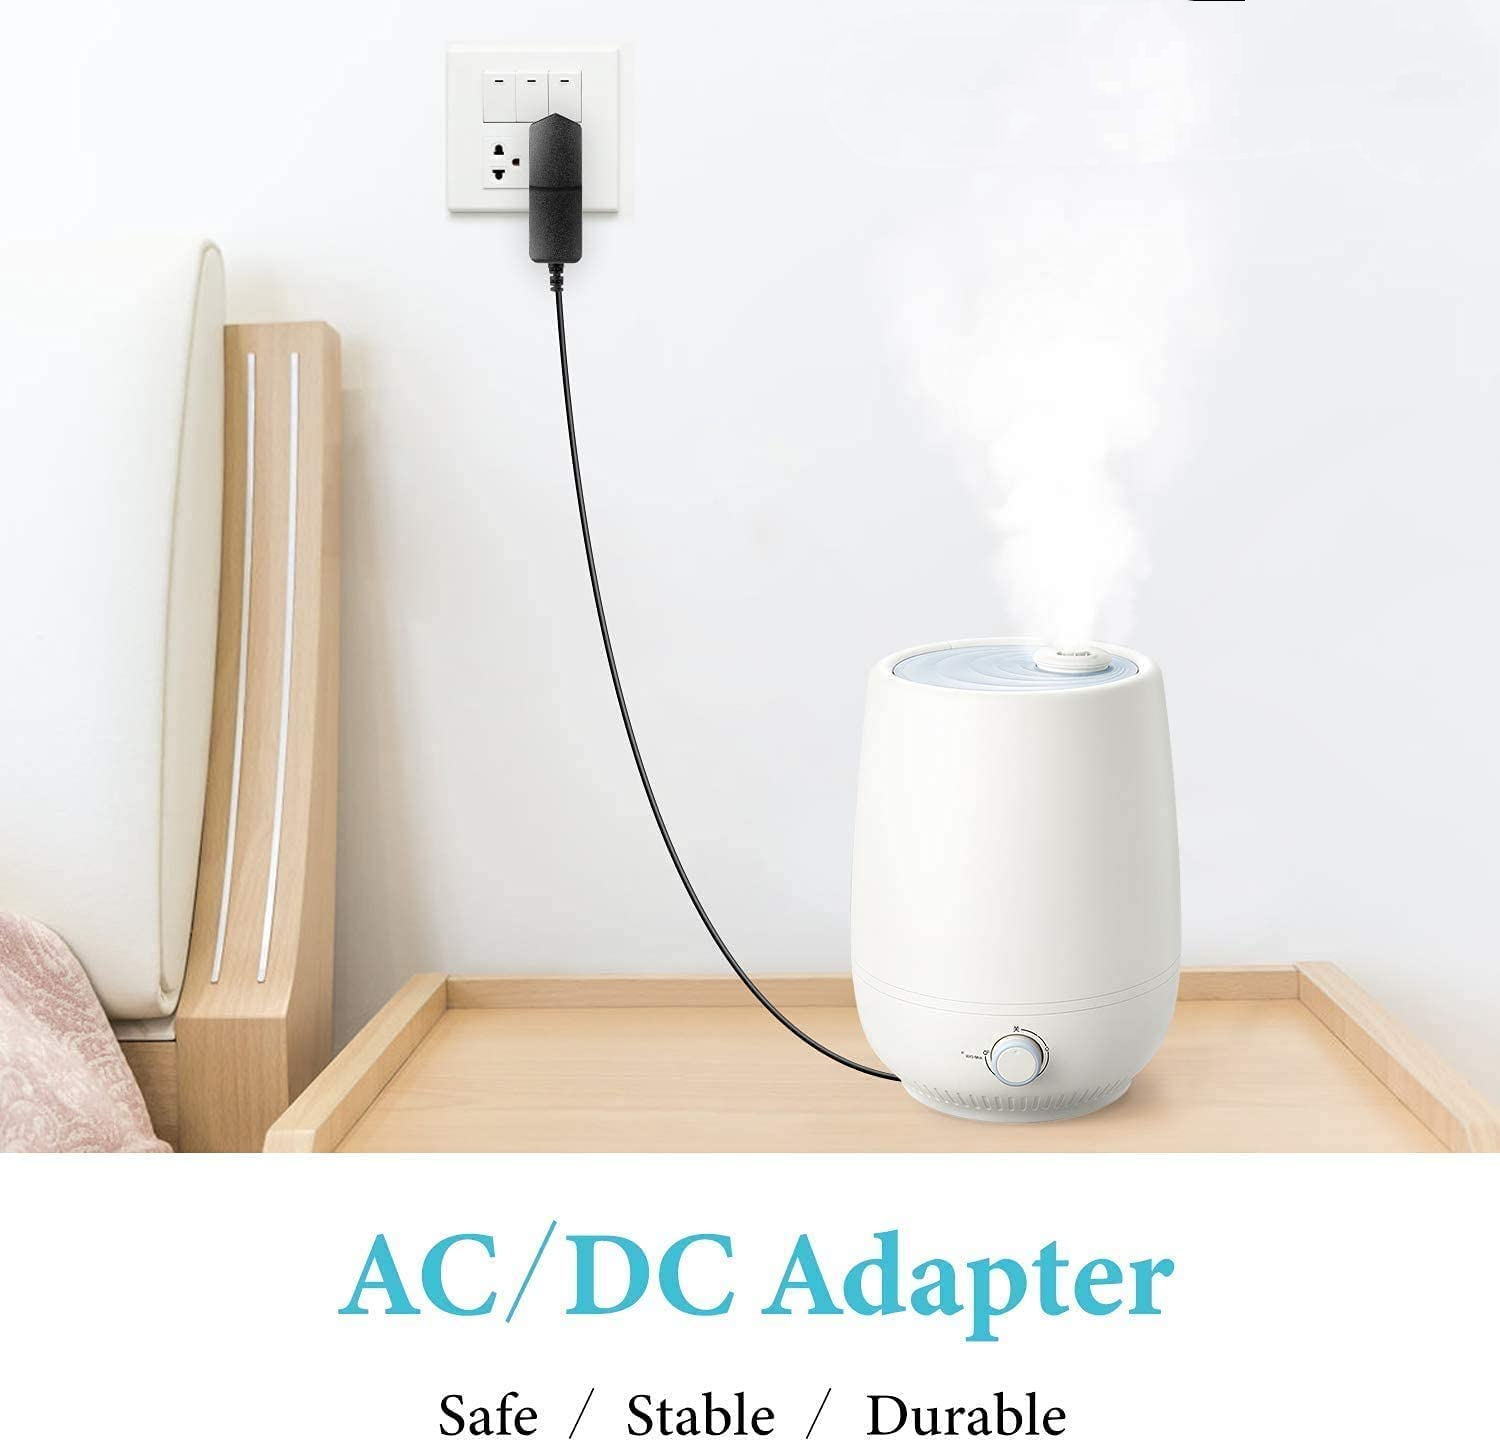 AbleGrid AC Adapter Compatible with iHome iC16 iC16B iC16BC Portable Alarm Clock Speak Power Supply